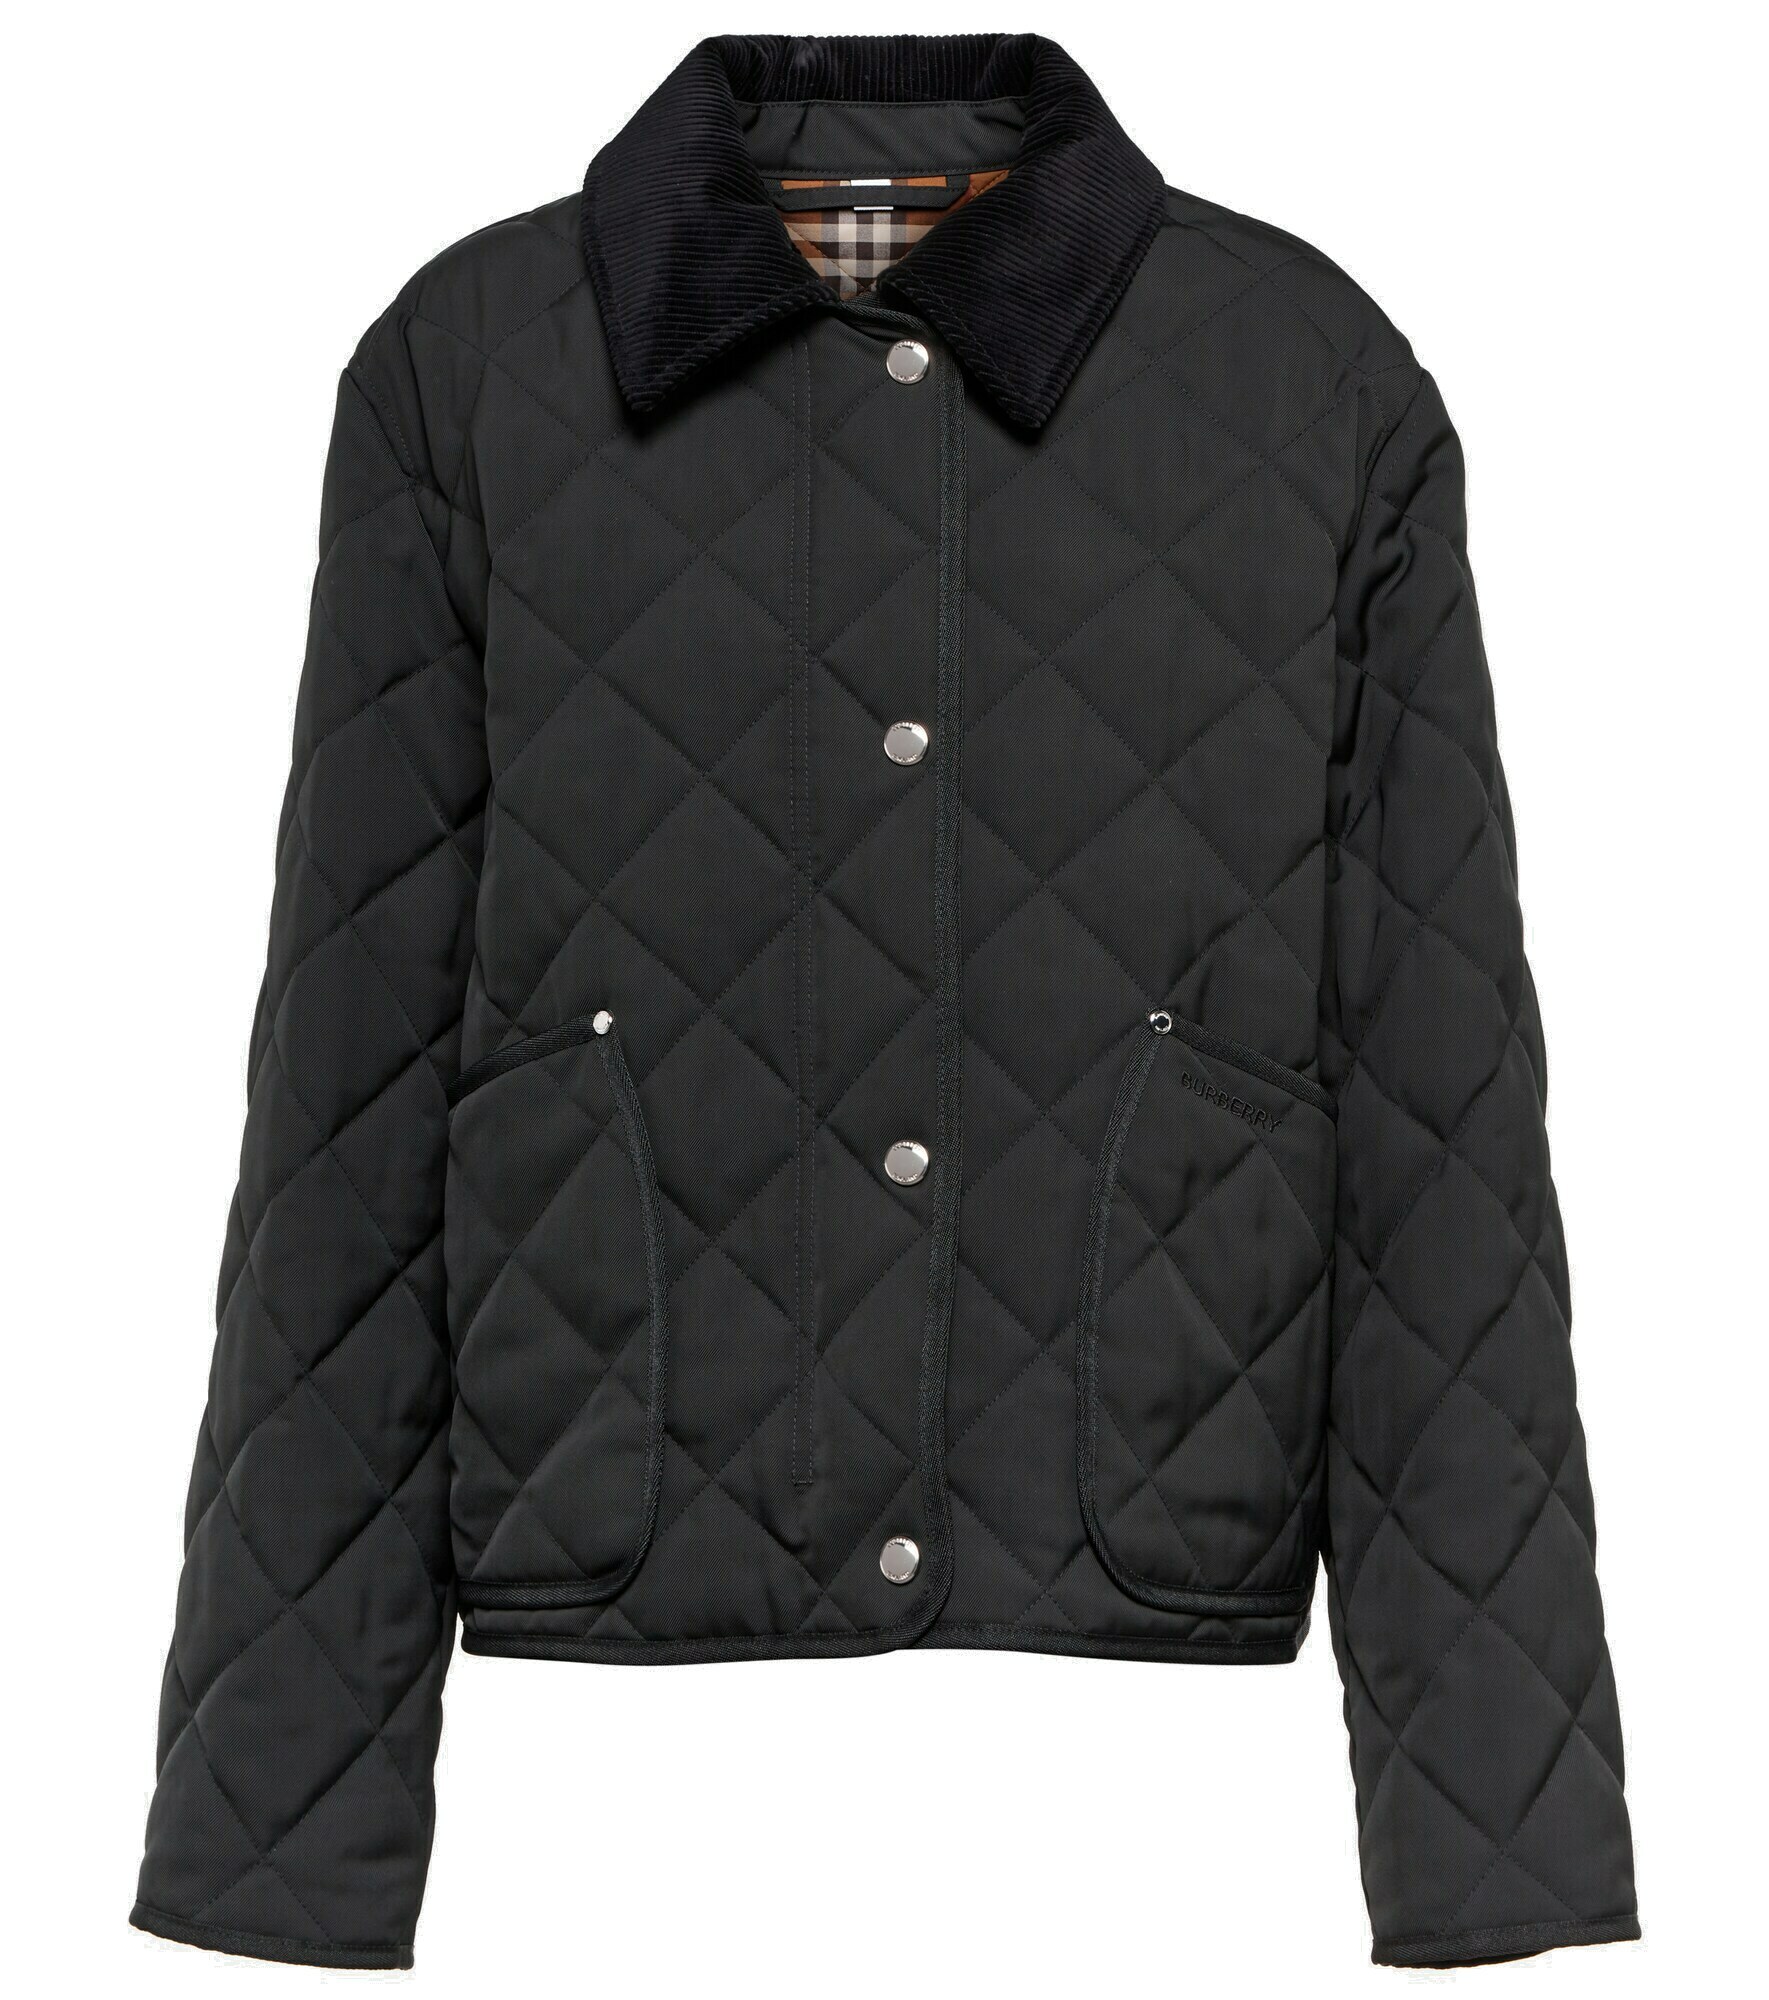 Burberry - Lanford quilted jacket Burberry